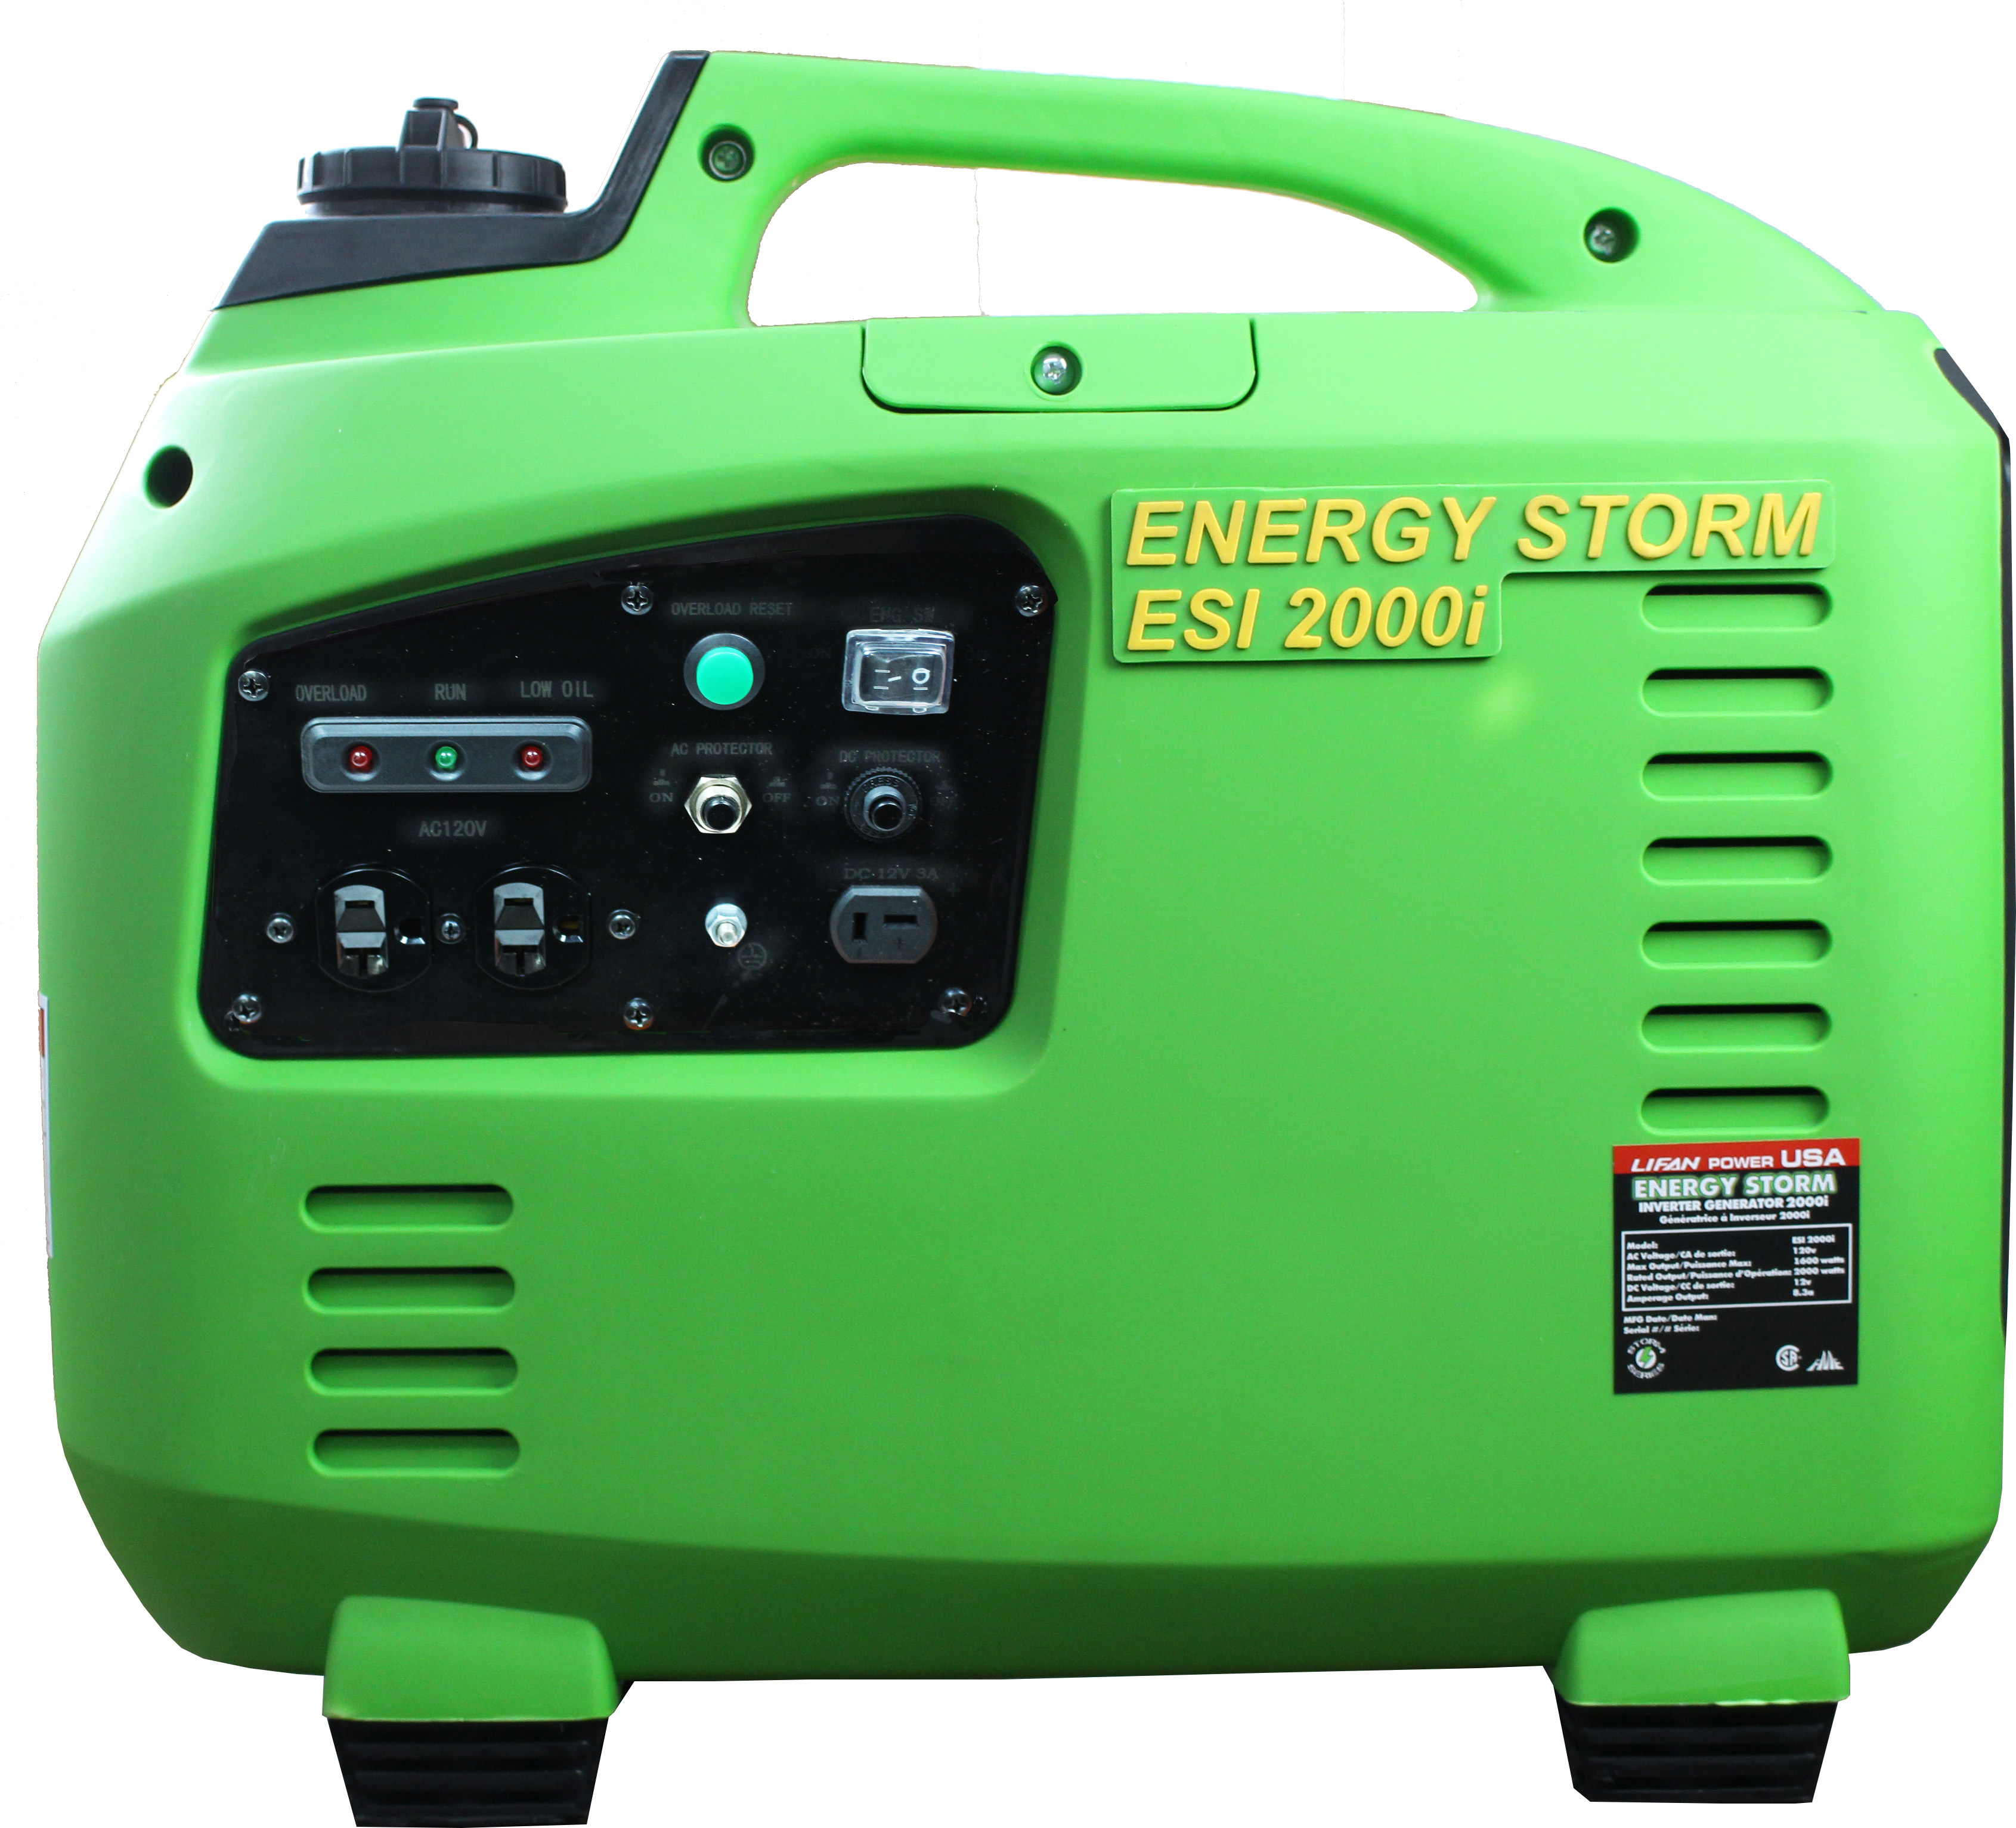 Tailgater/Camping Special, Energy Storm ESi2000i-CA (California Sales Compliant) 105cc Gasoline Powered Inverter Generator, light weight power, 50 State and Canada Sales Compliant - image 1 of 3